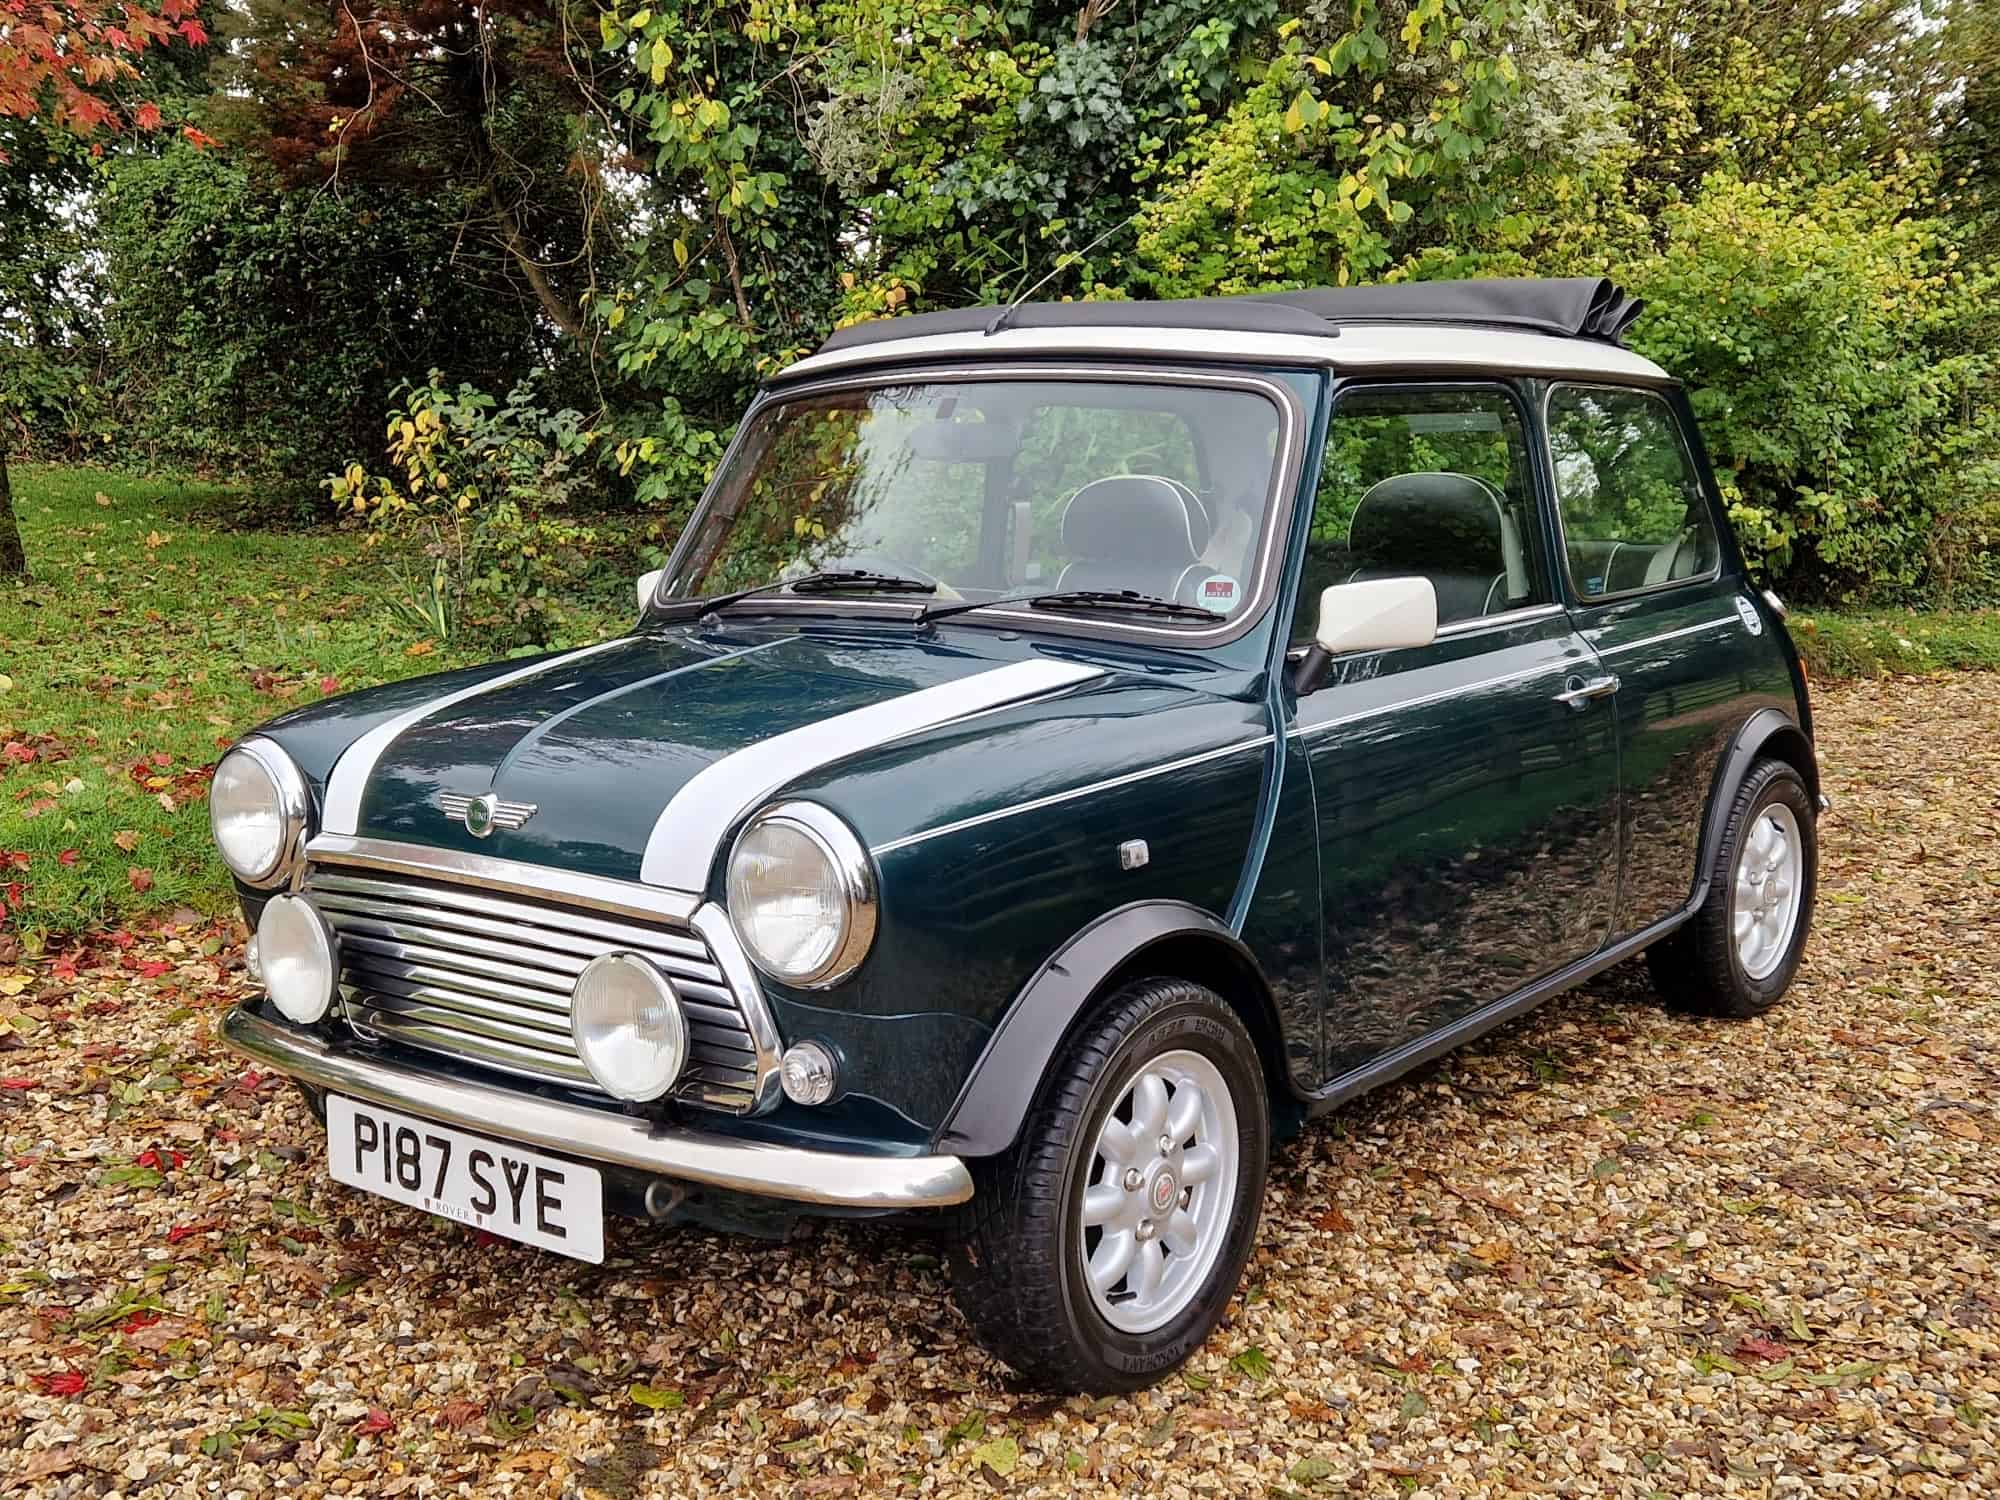 ** NOW SOLD ** 1997 Rover Mini Cooper On 14480 Miles From New – Richard ...